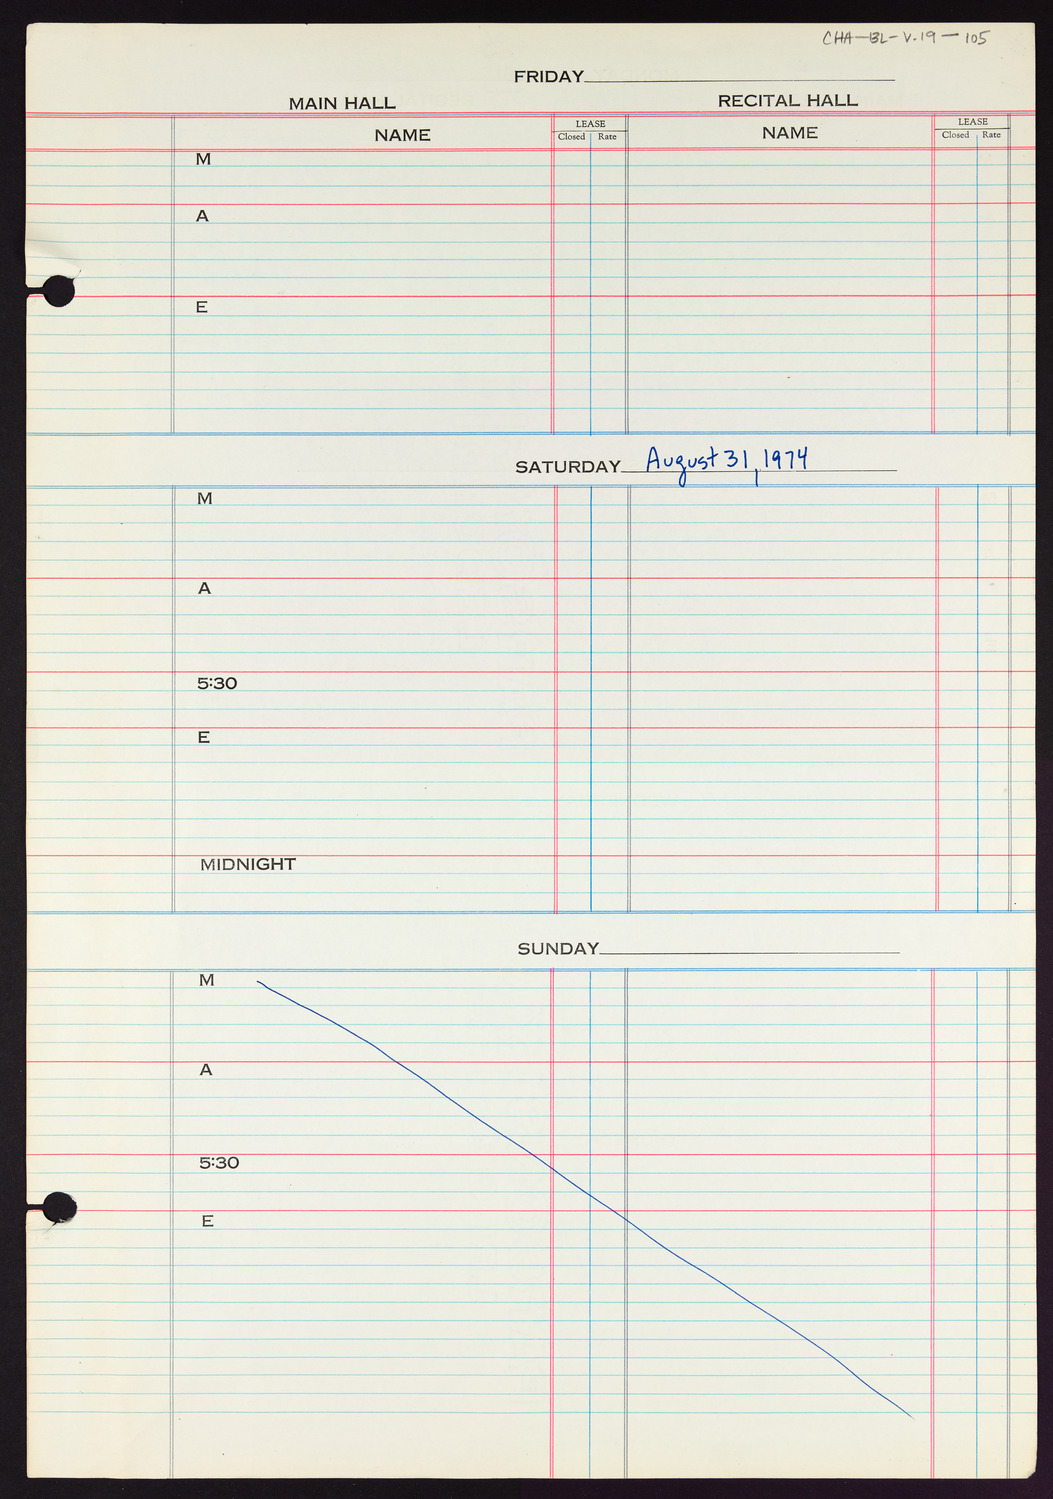 Carnegie Hall Booking Ledger, volume 19, page 105